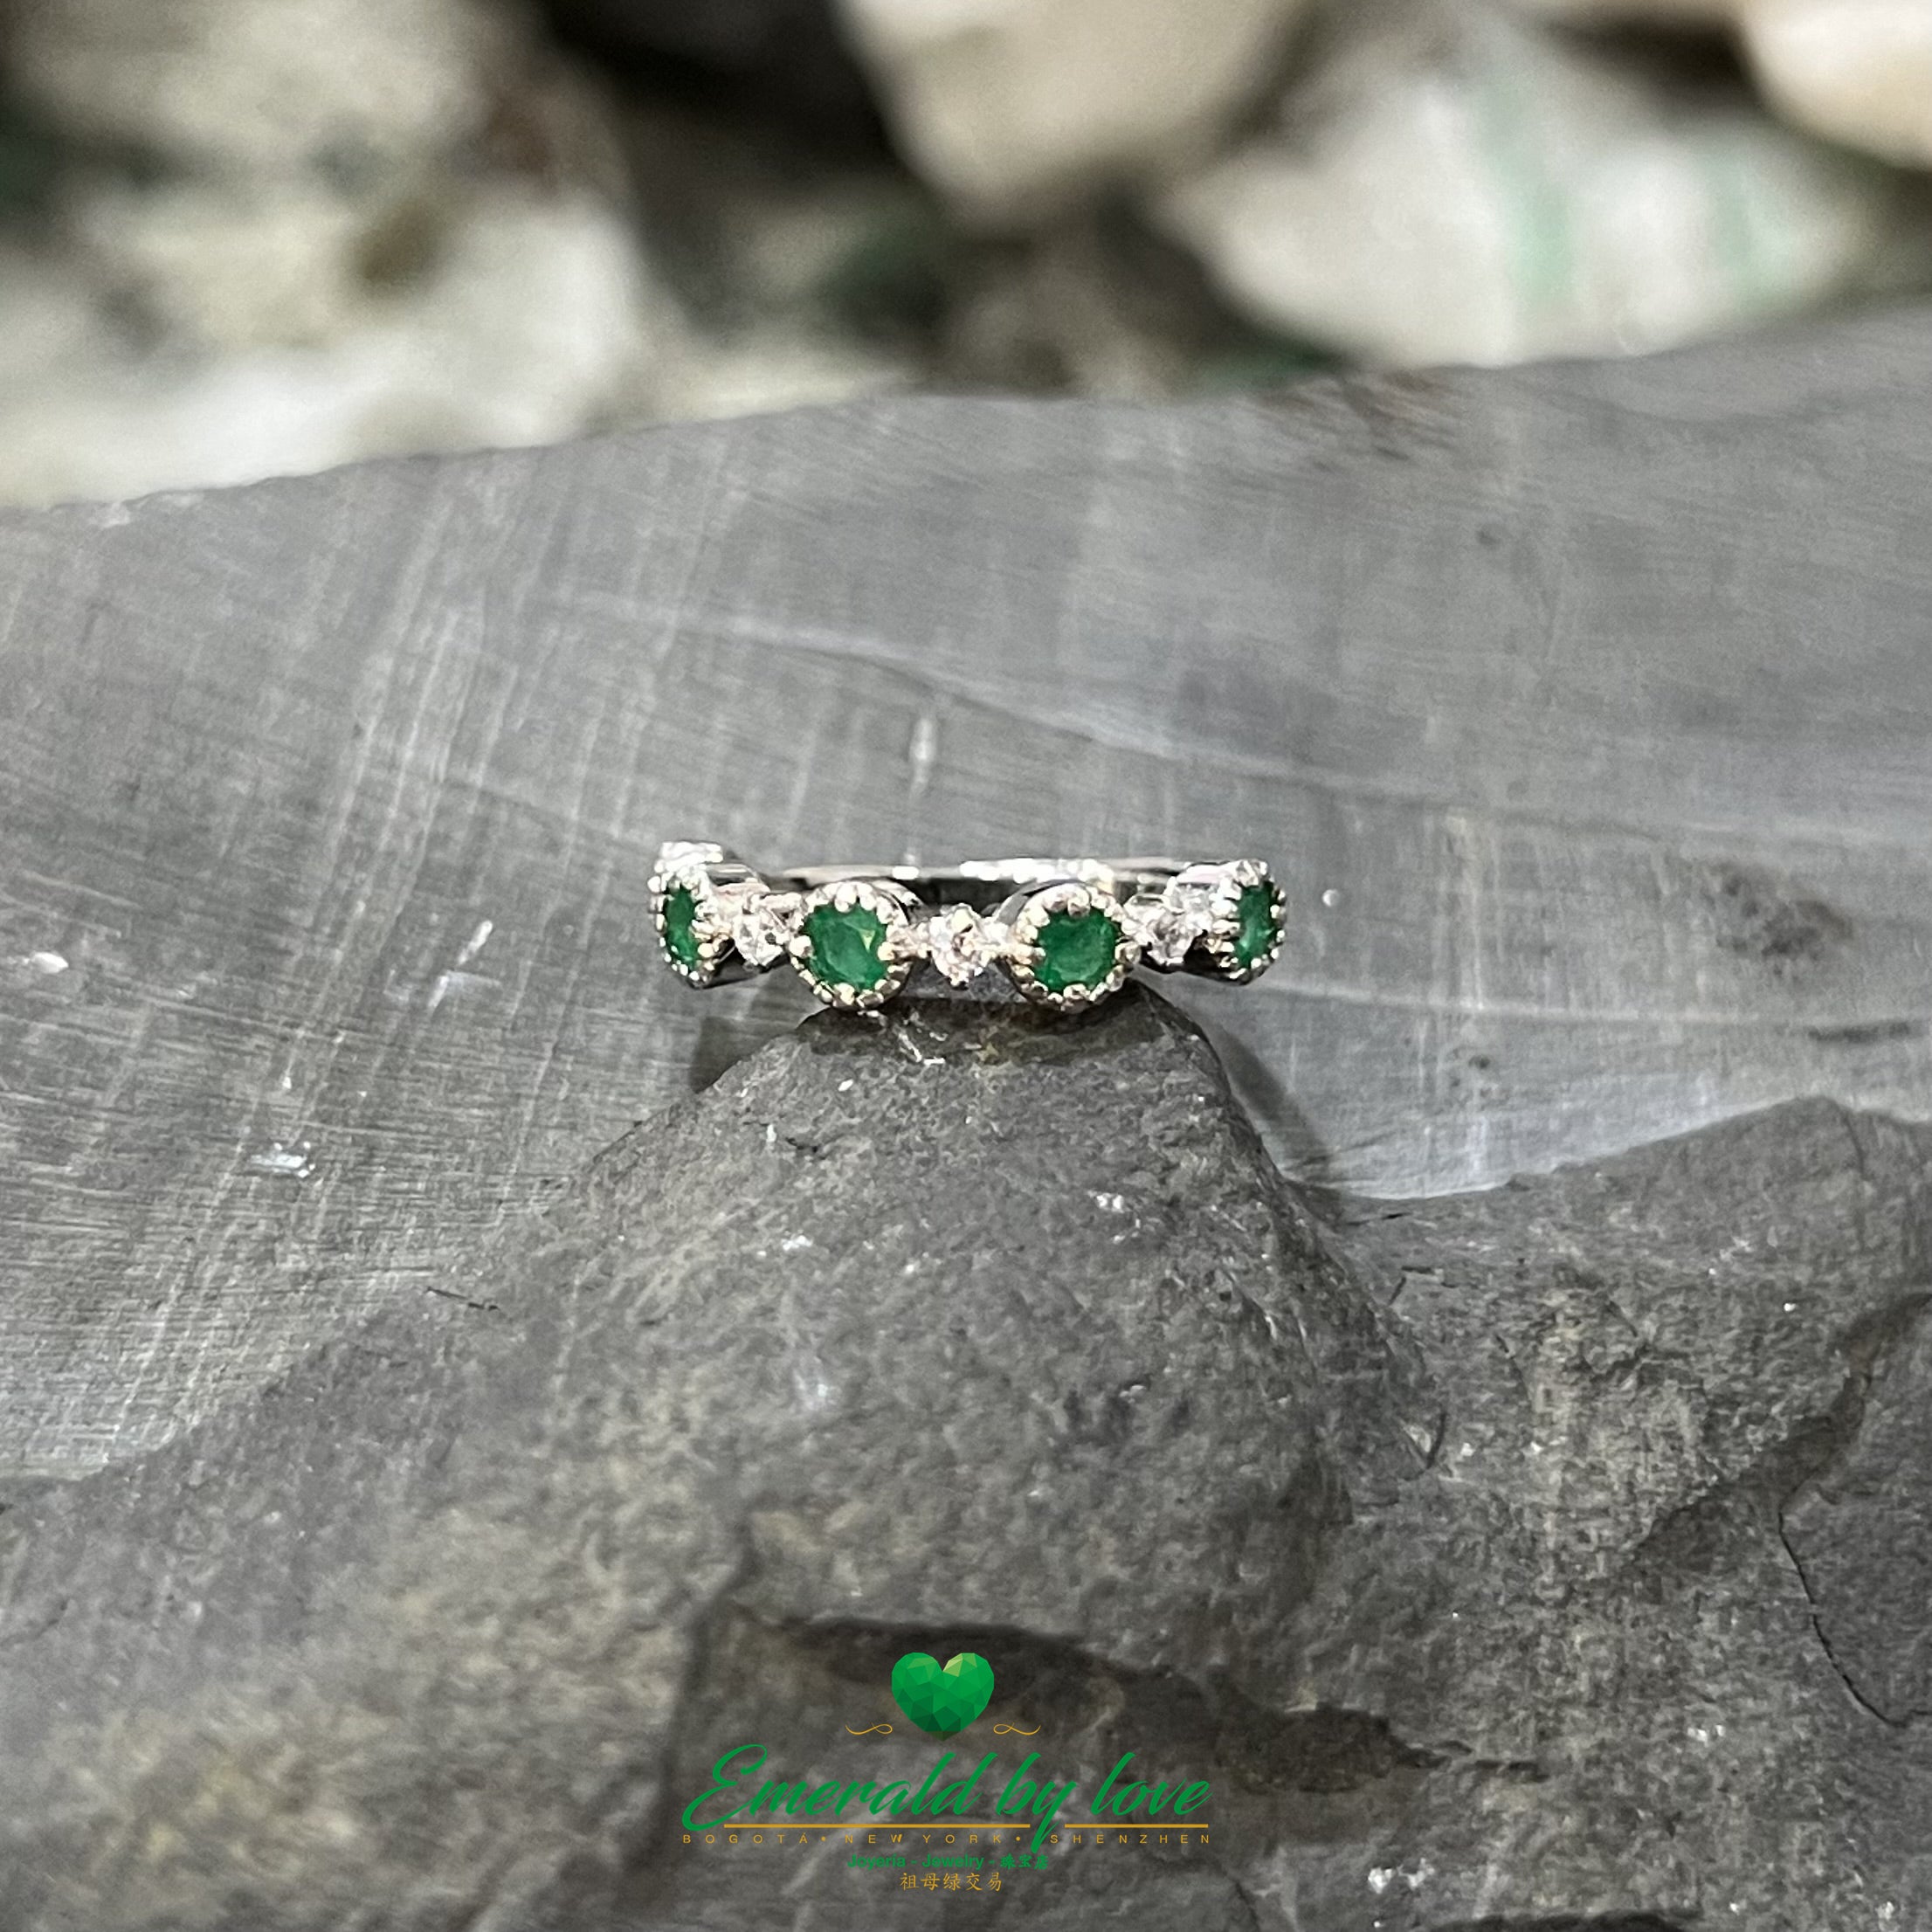 Round Emerald Bezel Band Ring with Sparkling Zirconia Accents